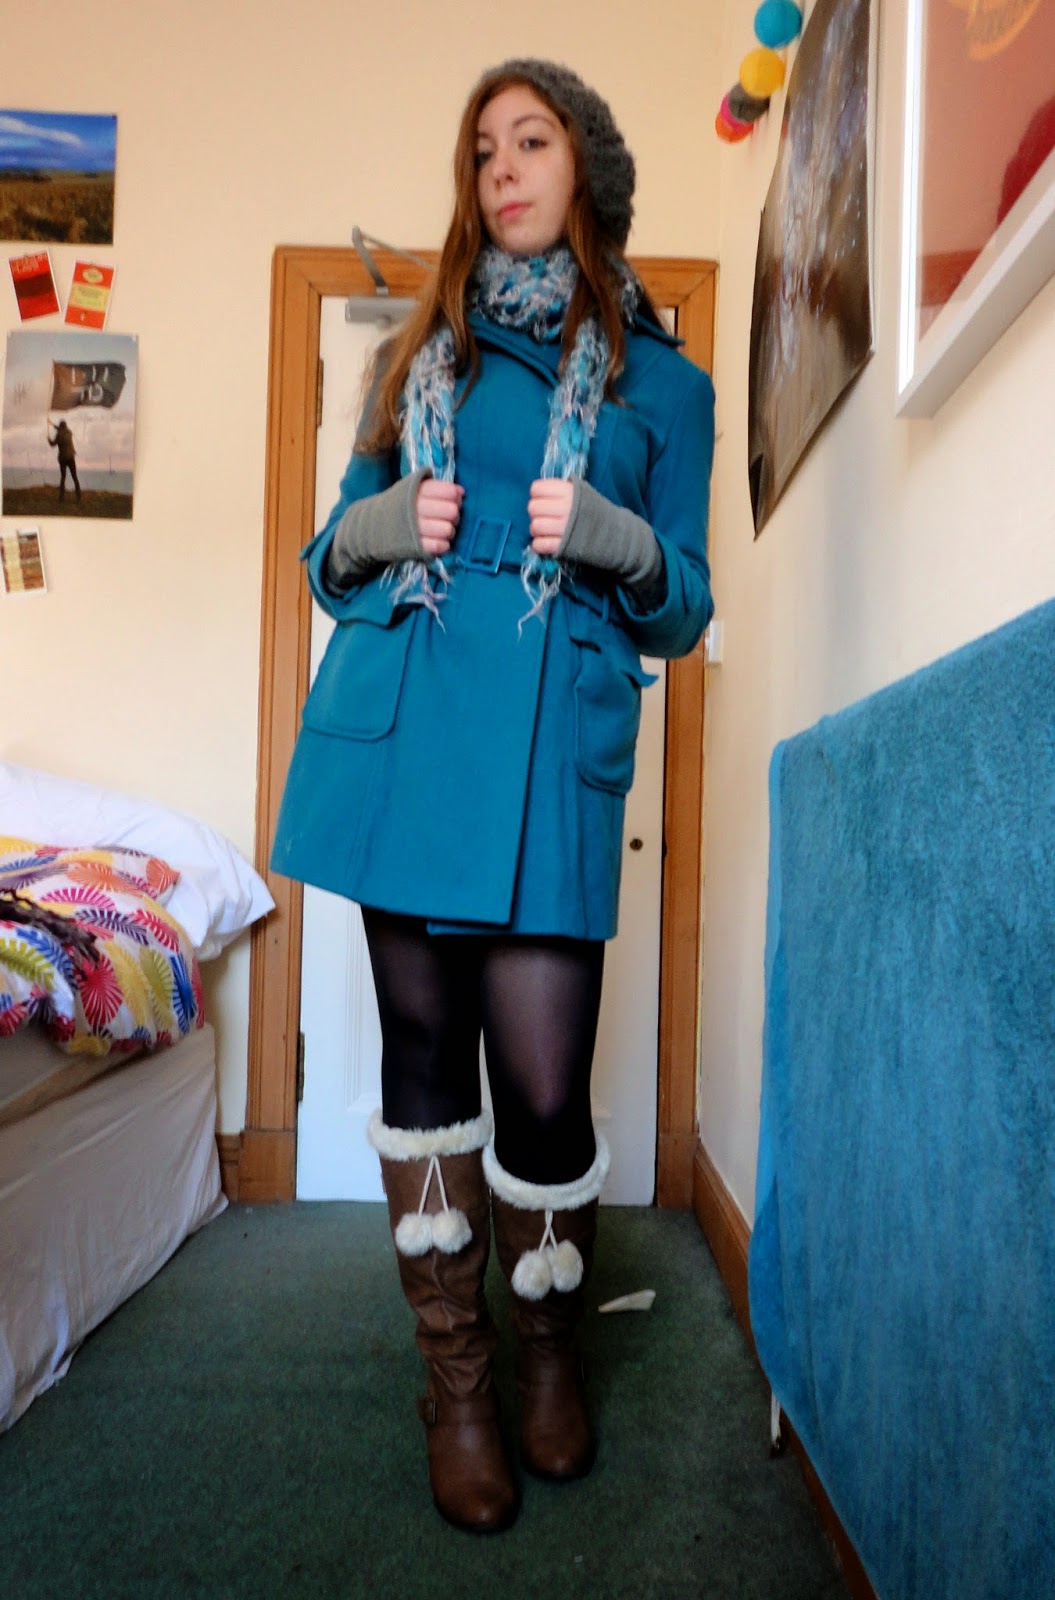 outdoor winter outfit of turquoise blue coat, brown leather boots, grey hat and gloves and blue scarf